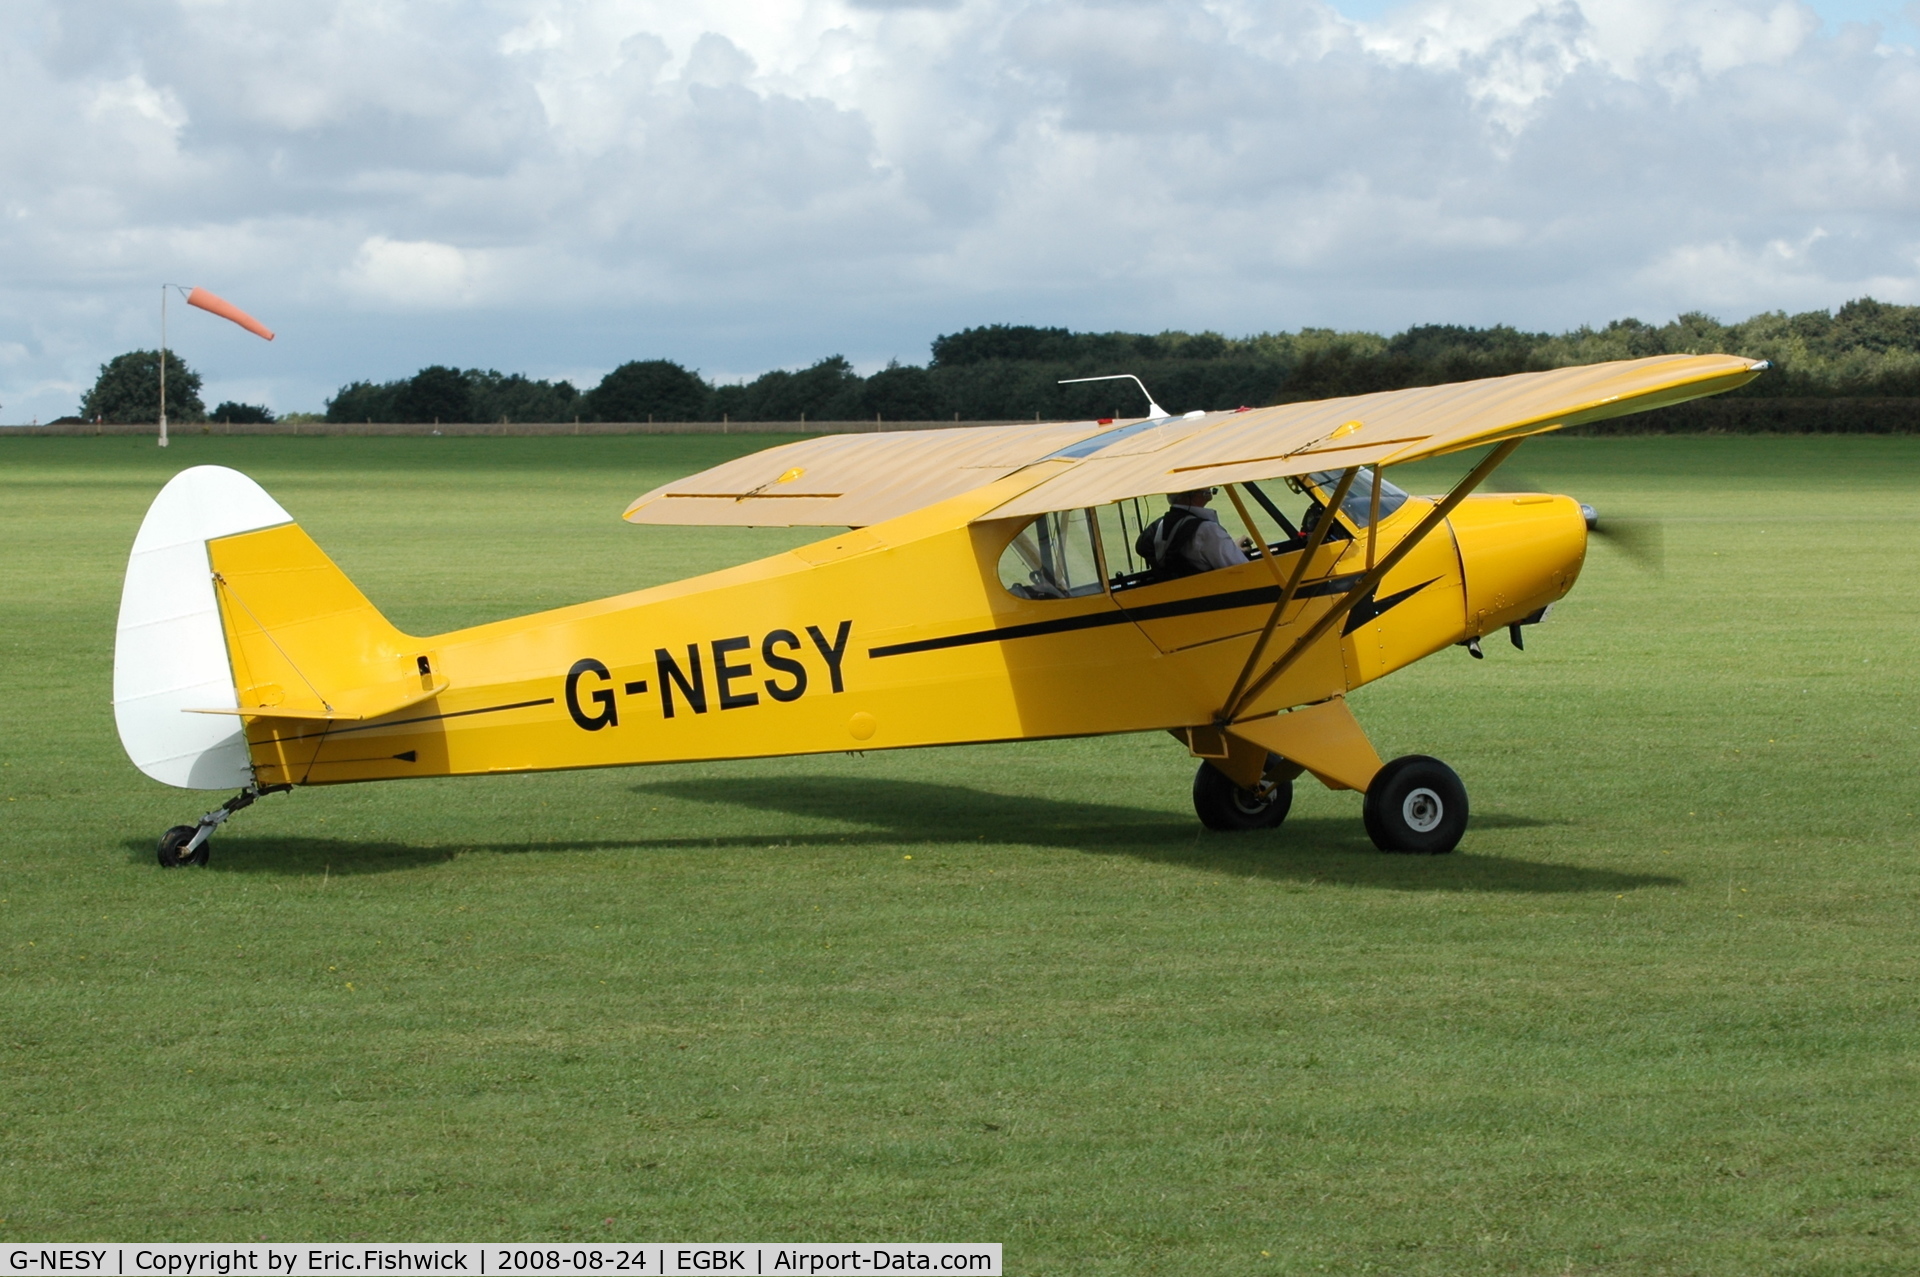 G-NESY, 1960 Piper PA-18 Super Cub C/N 18-7482, 2. G-NESY at the Sywell Airshow 24 Aug 2008